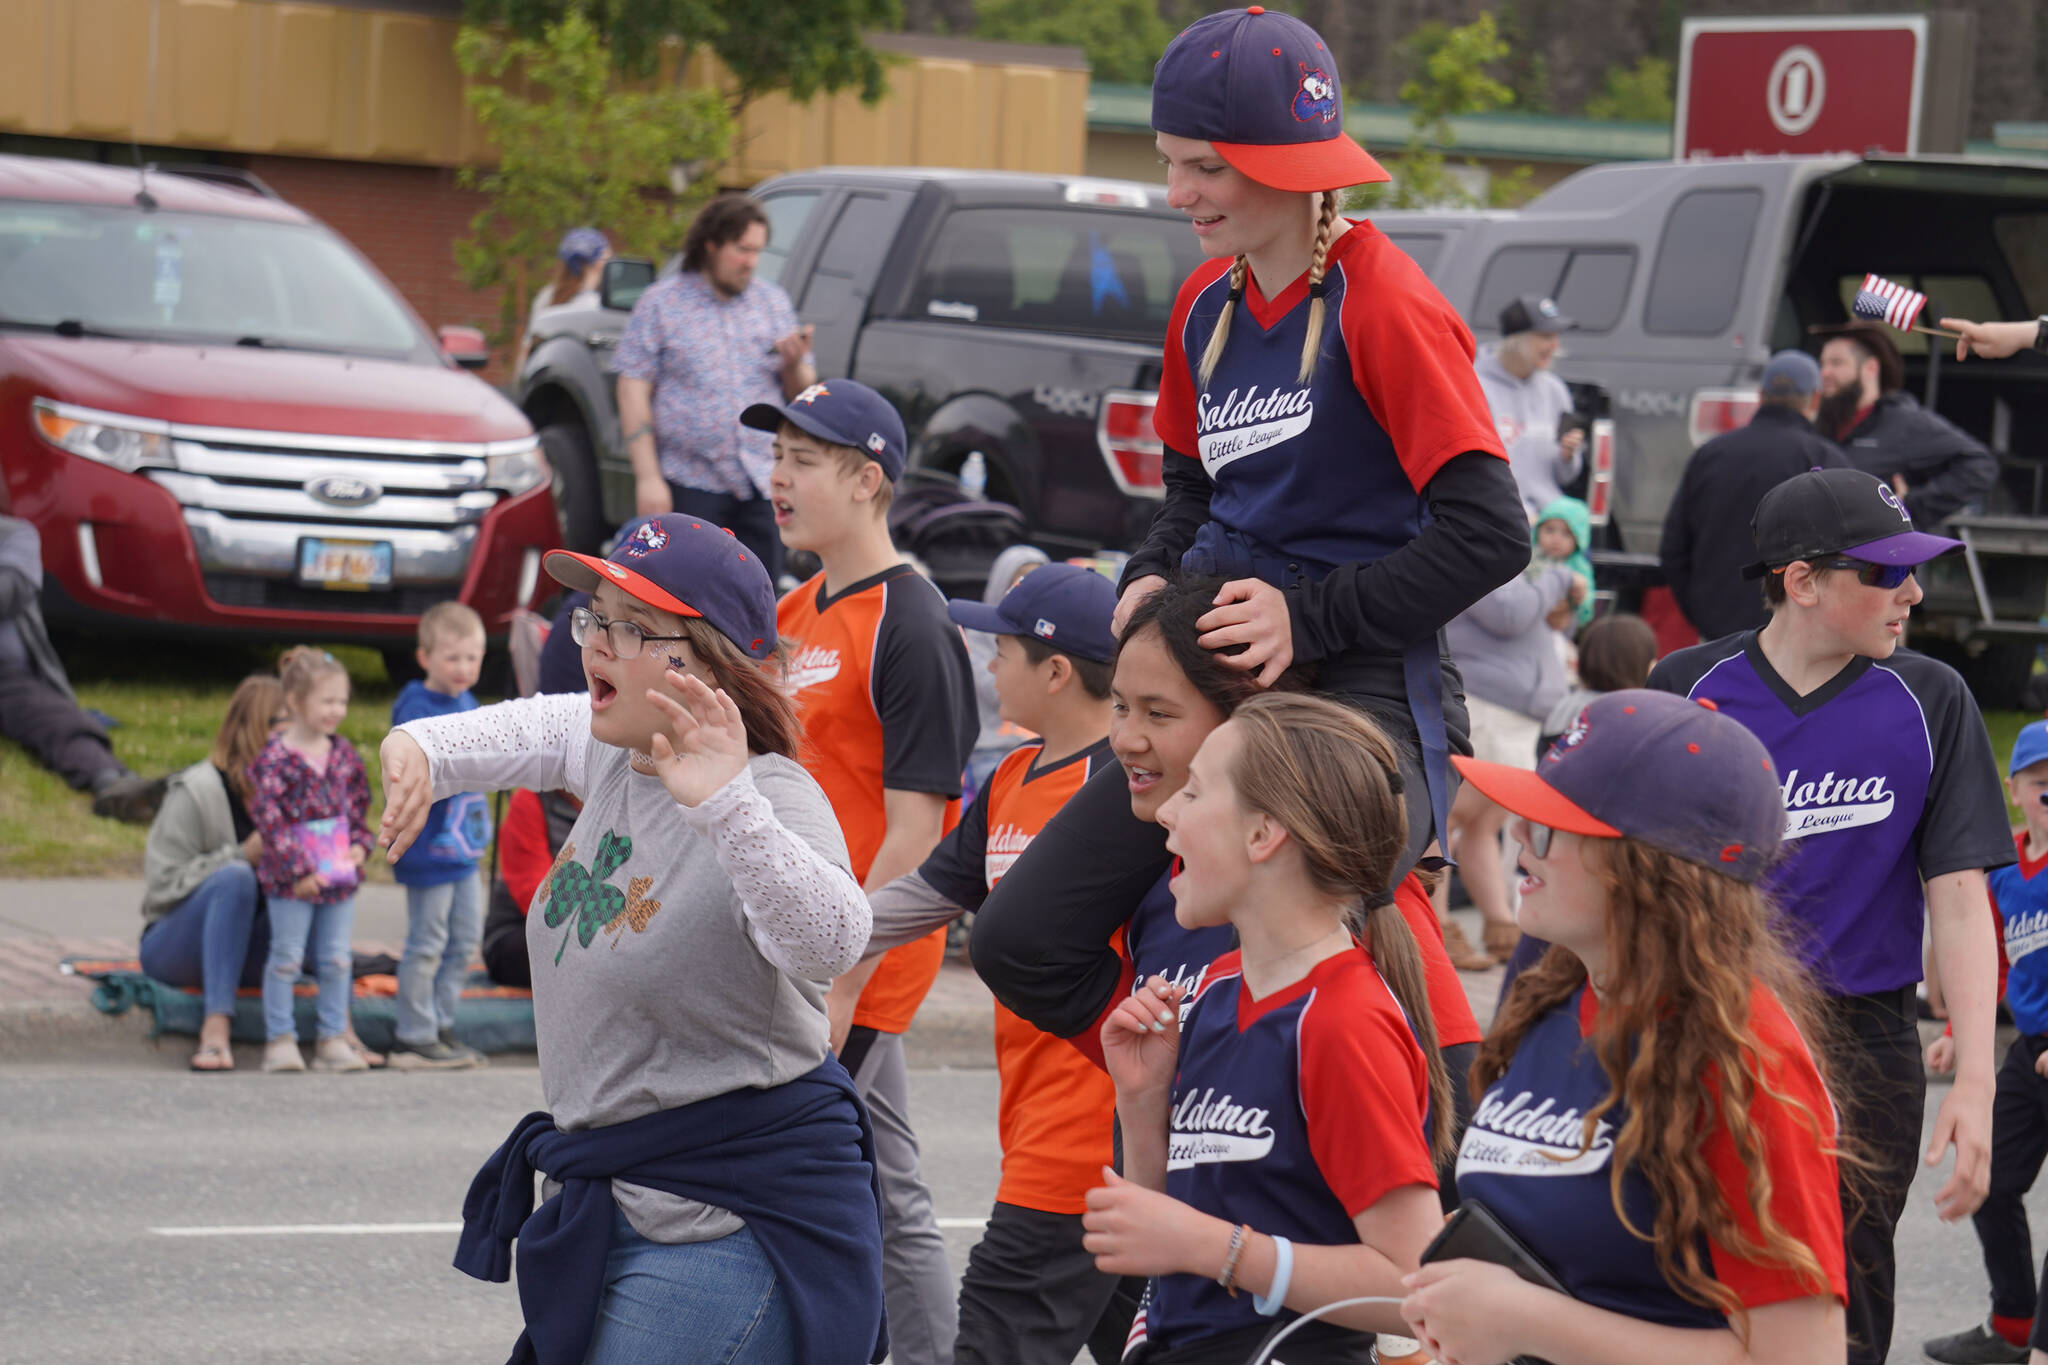 Soldotna Little League players call out to attendees as the Fourth of July Parade moves down the Kenai Spur Highway in Kenai, Alaska on Tuesday, July 4, 2023. (Jake Dye/Peninsula Clarion)